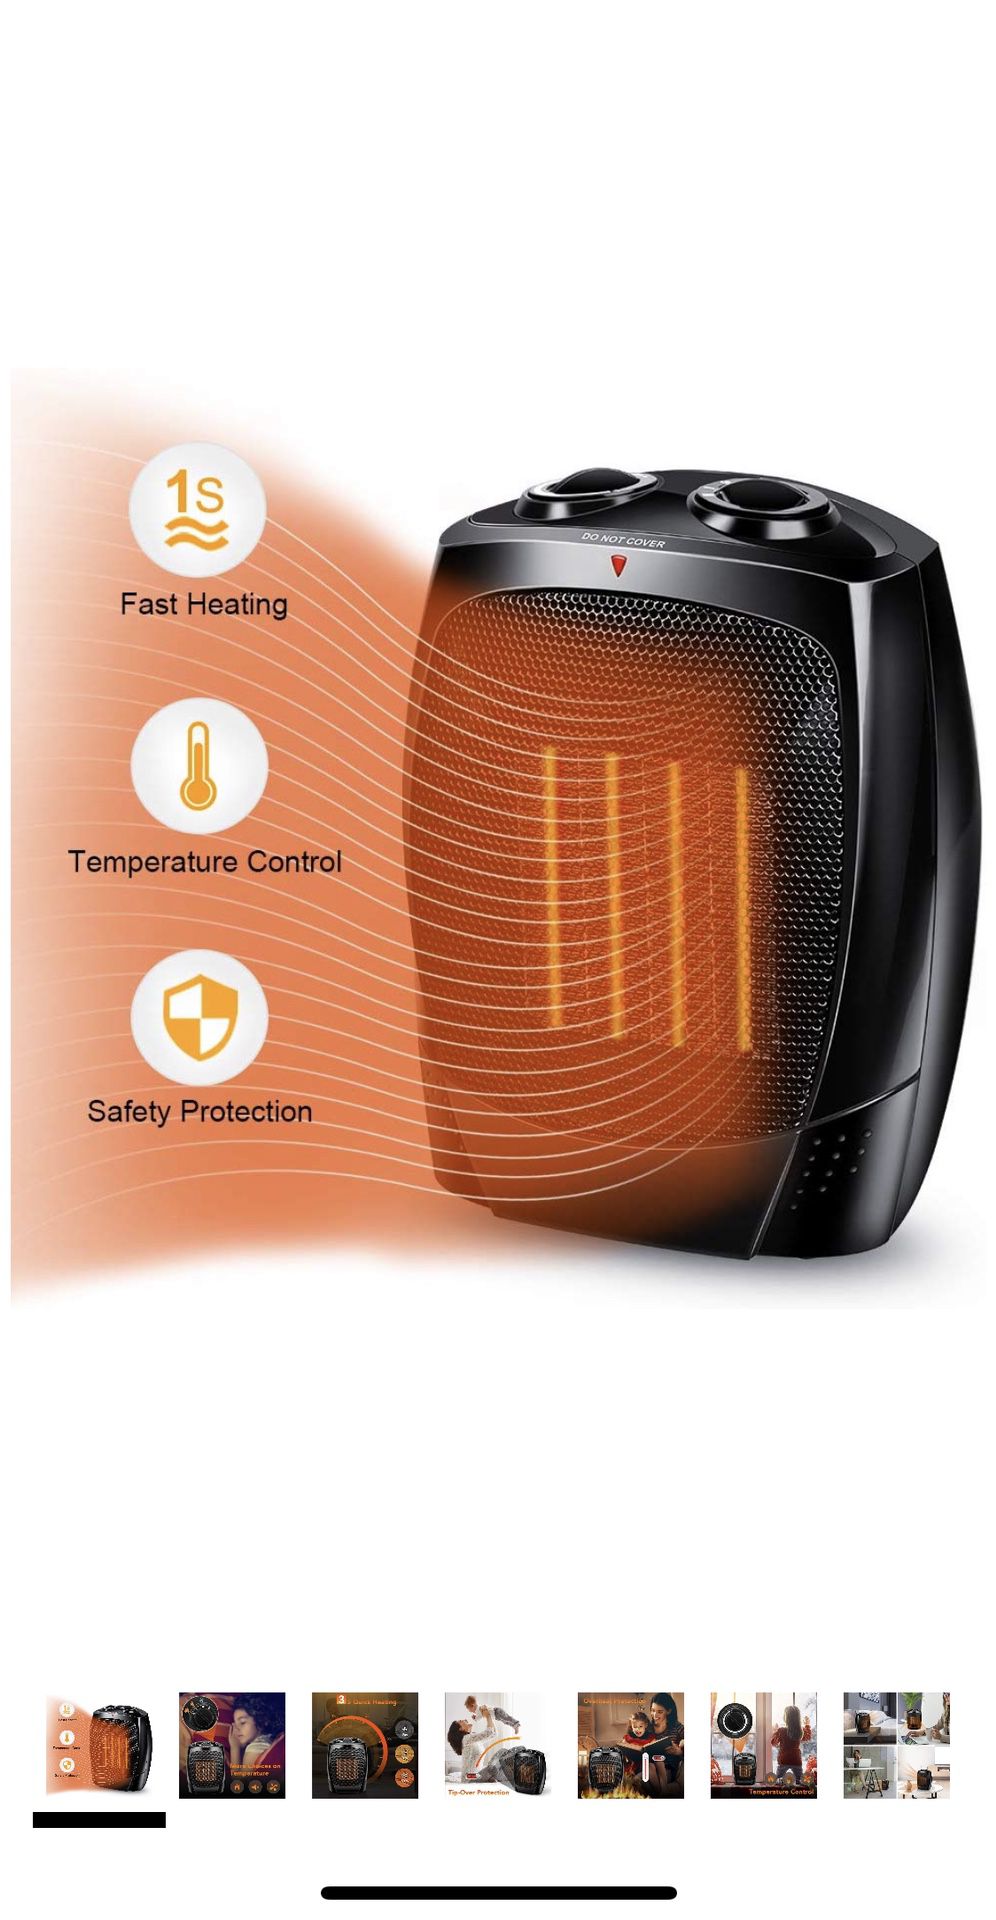 Portable heater for home and office